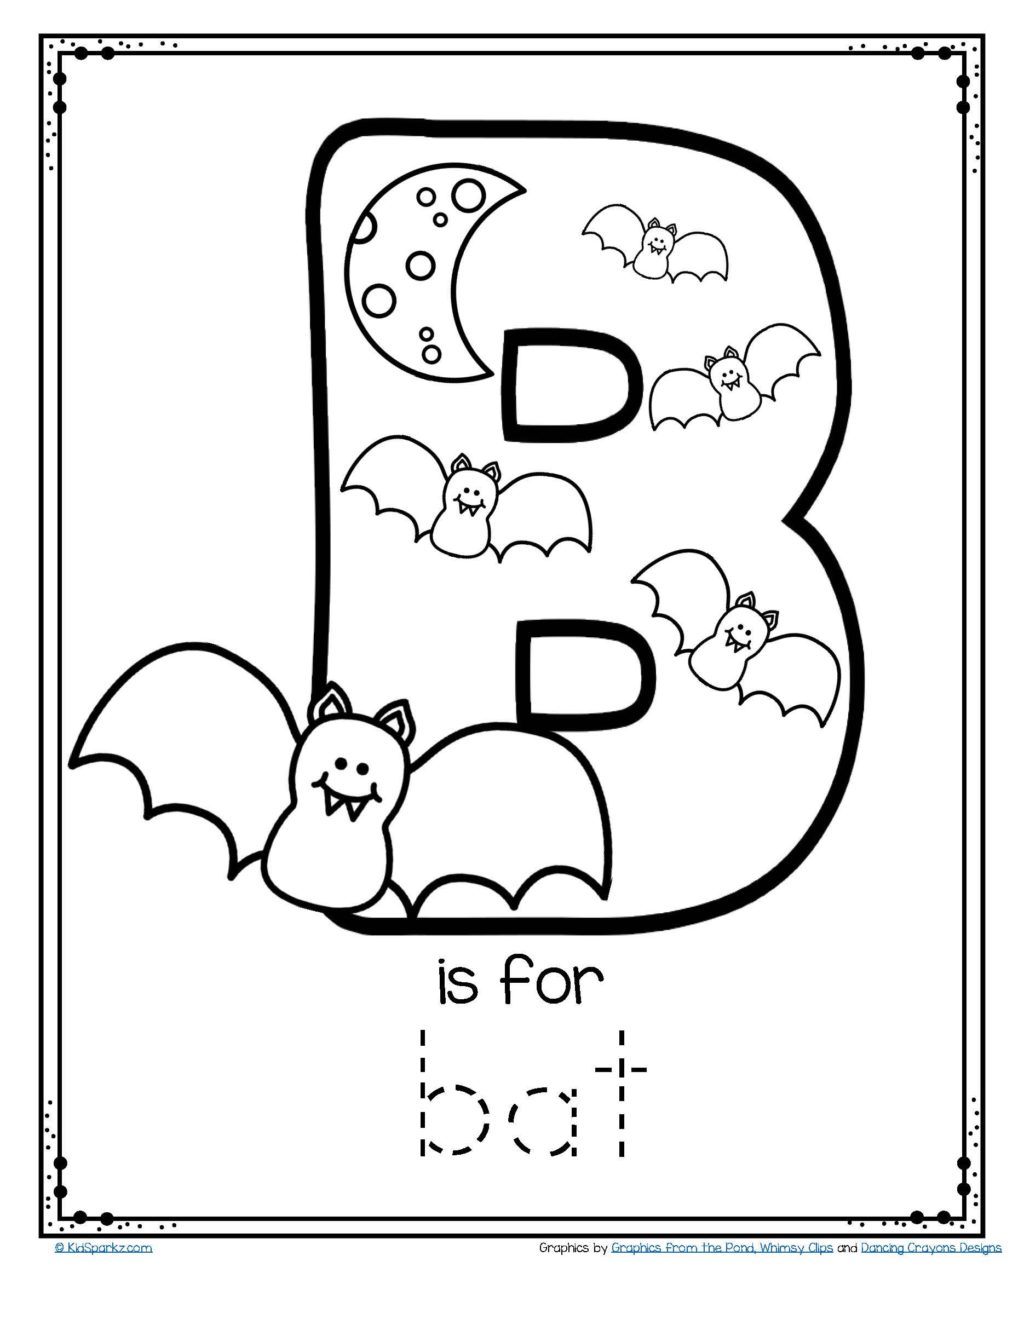 coloring pages free alphabet tracing and letters for kids printables preschool pre math name letter preschoolers kindergarten sheets year olds alphabets 1024 1325 worksheets samsfriedchickenanddonuts coloring home